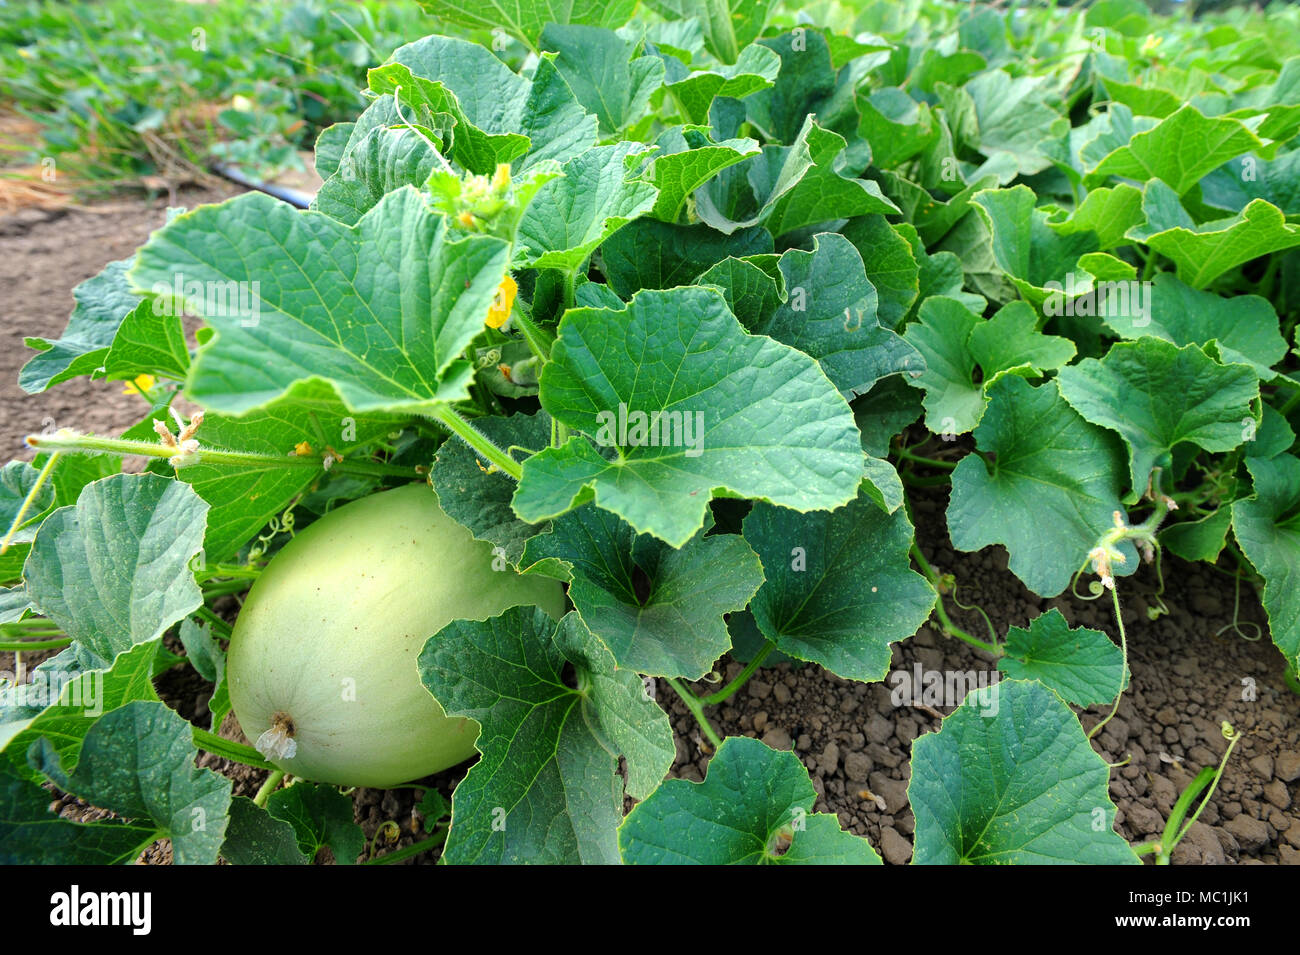 Melons are a popular agricultural crop grown in Capay Valley, California. Stock Photo